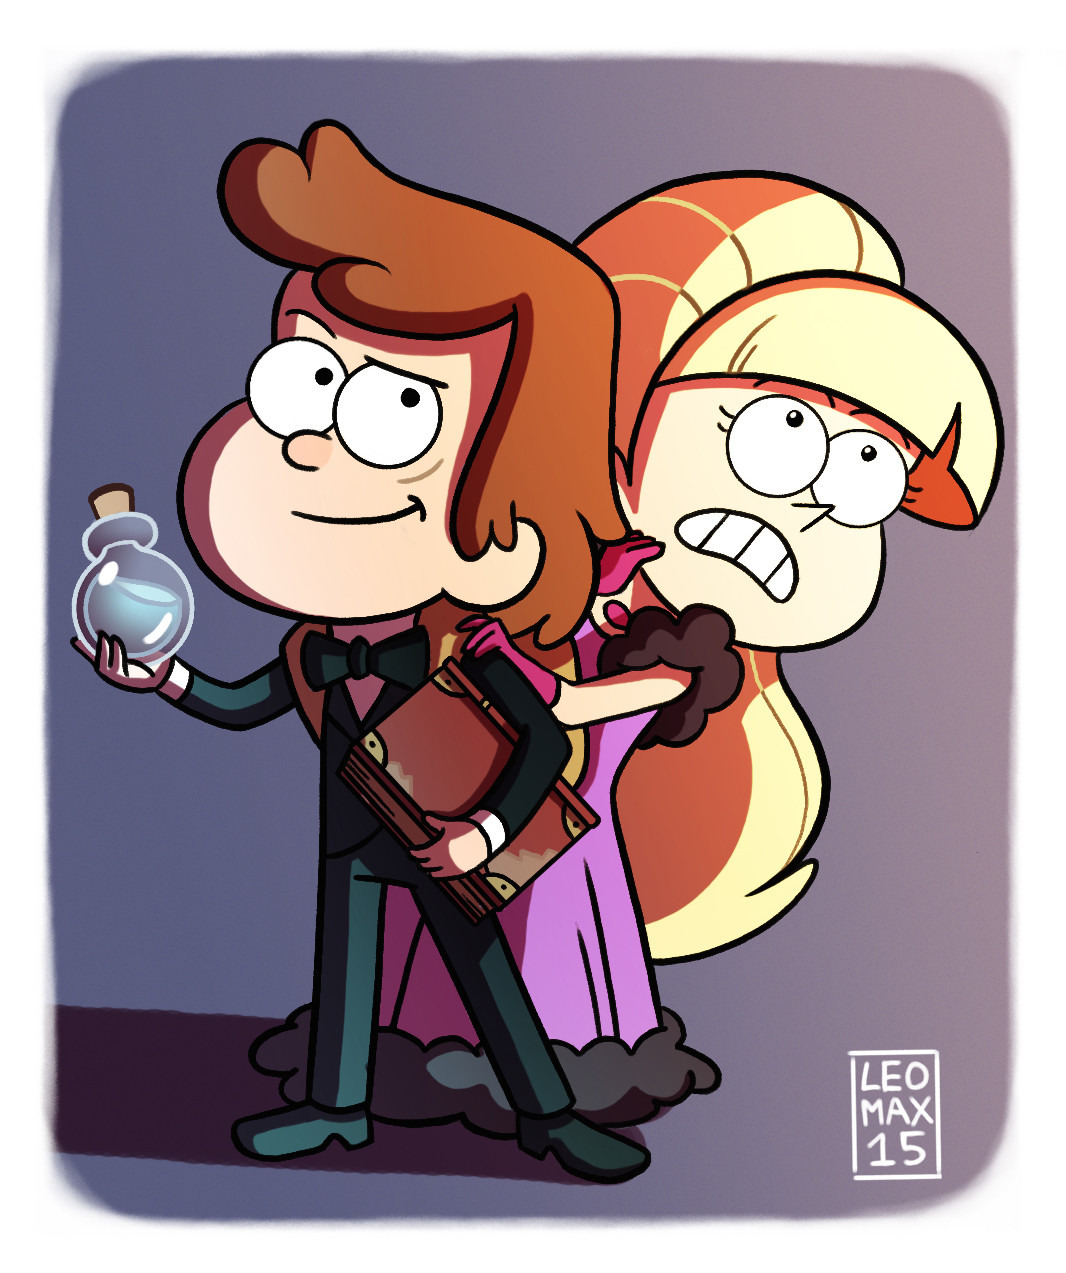 fanart I did after watching the 10th episode of season 2 of gravity falls.